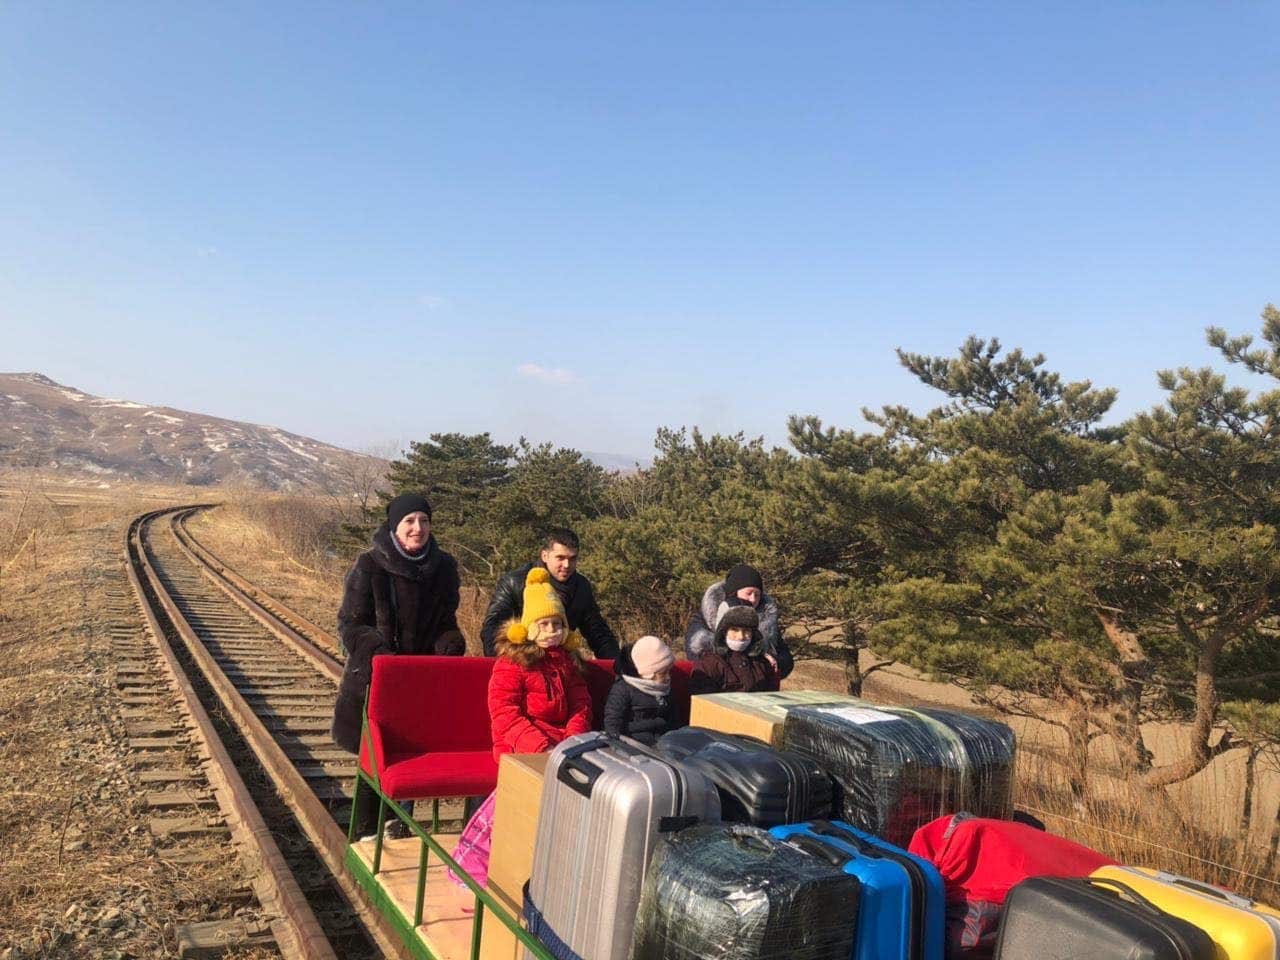 Russian diplomats exit North Korea by hand-pushed trolley